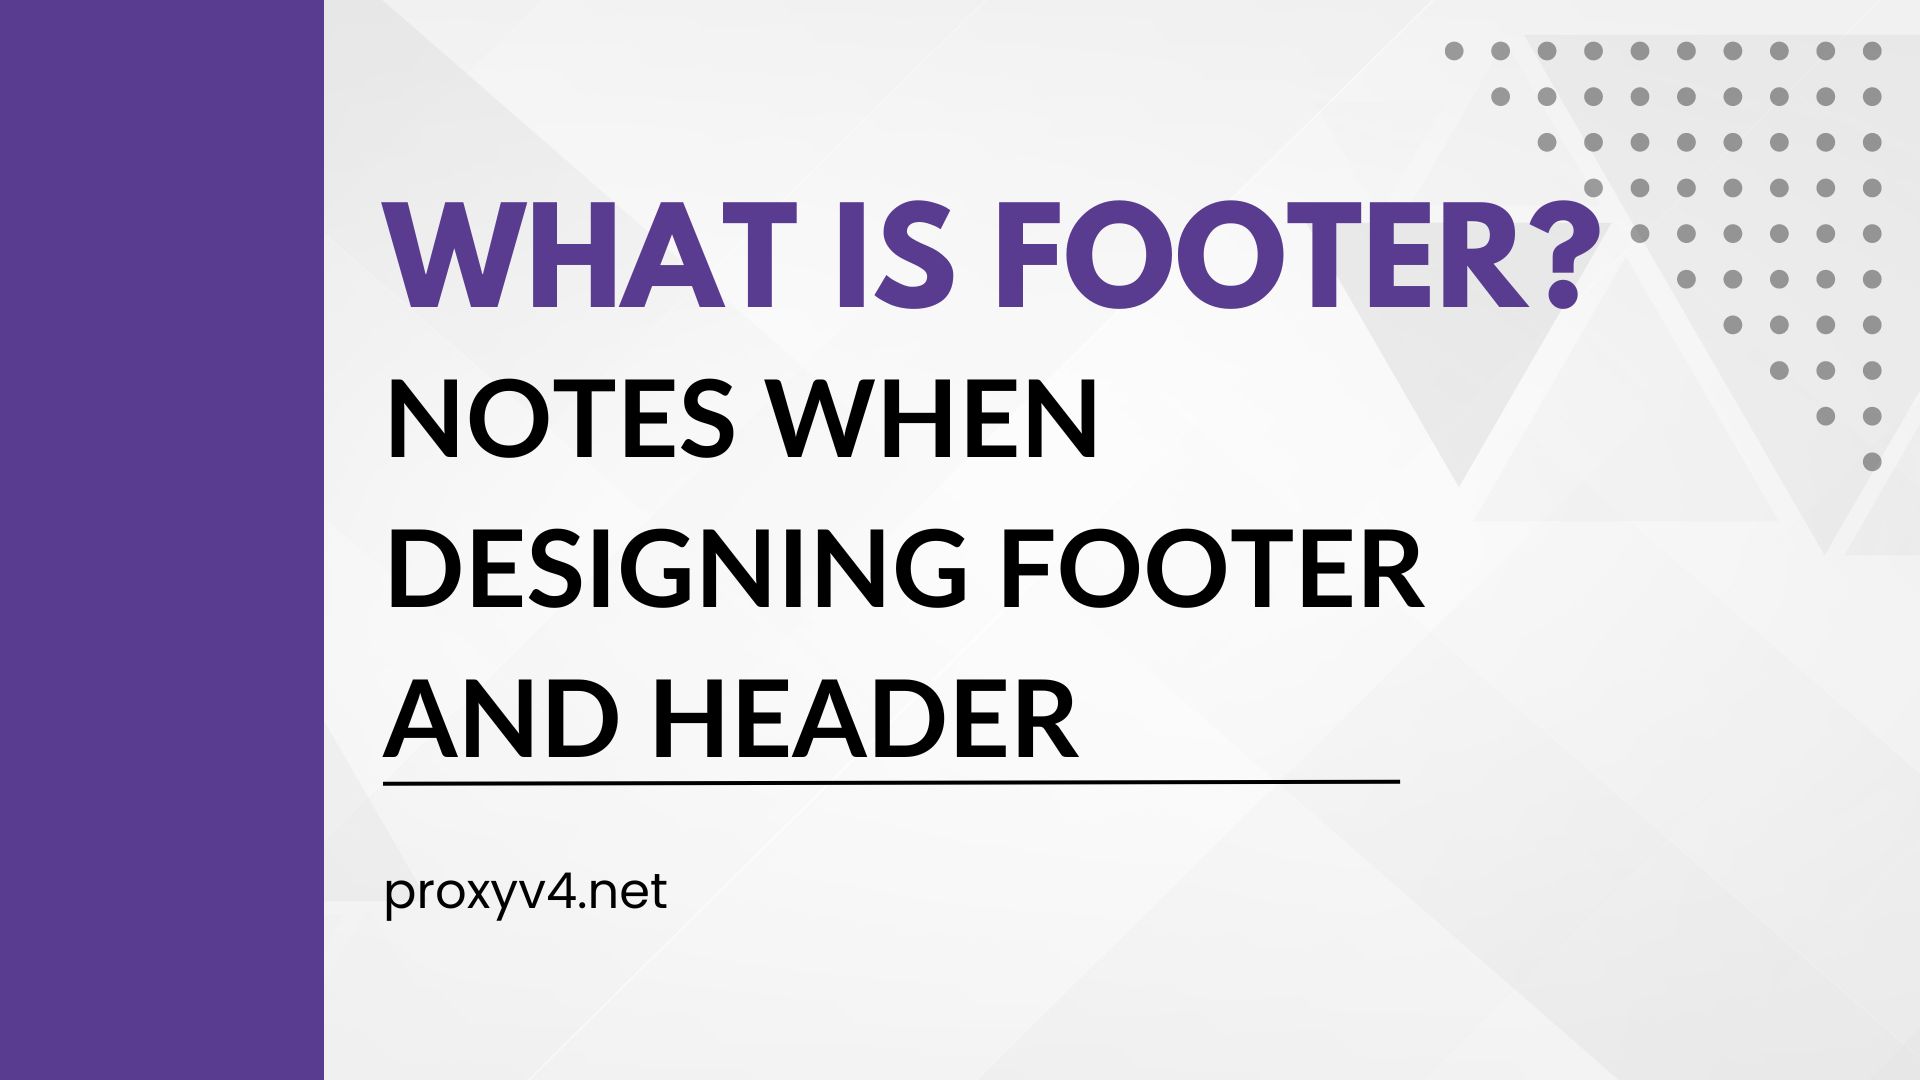 What is Footer? Notes when designing Footer and Header